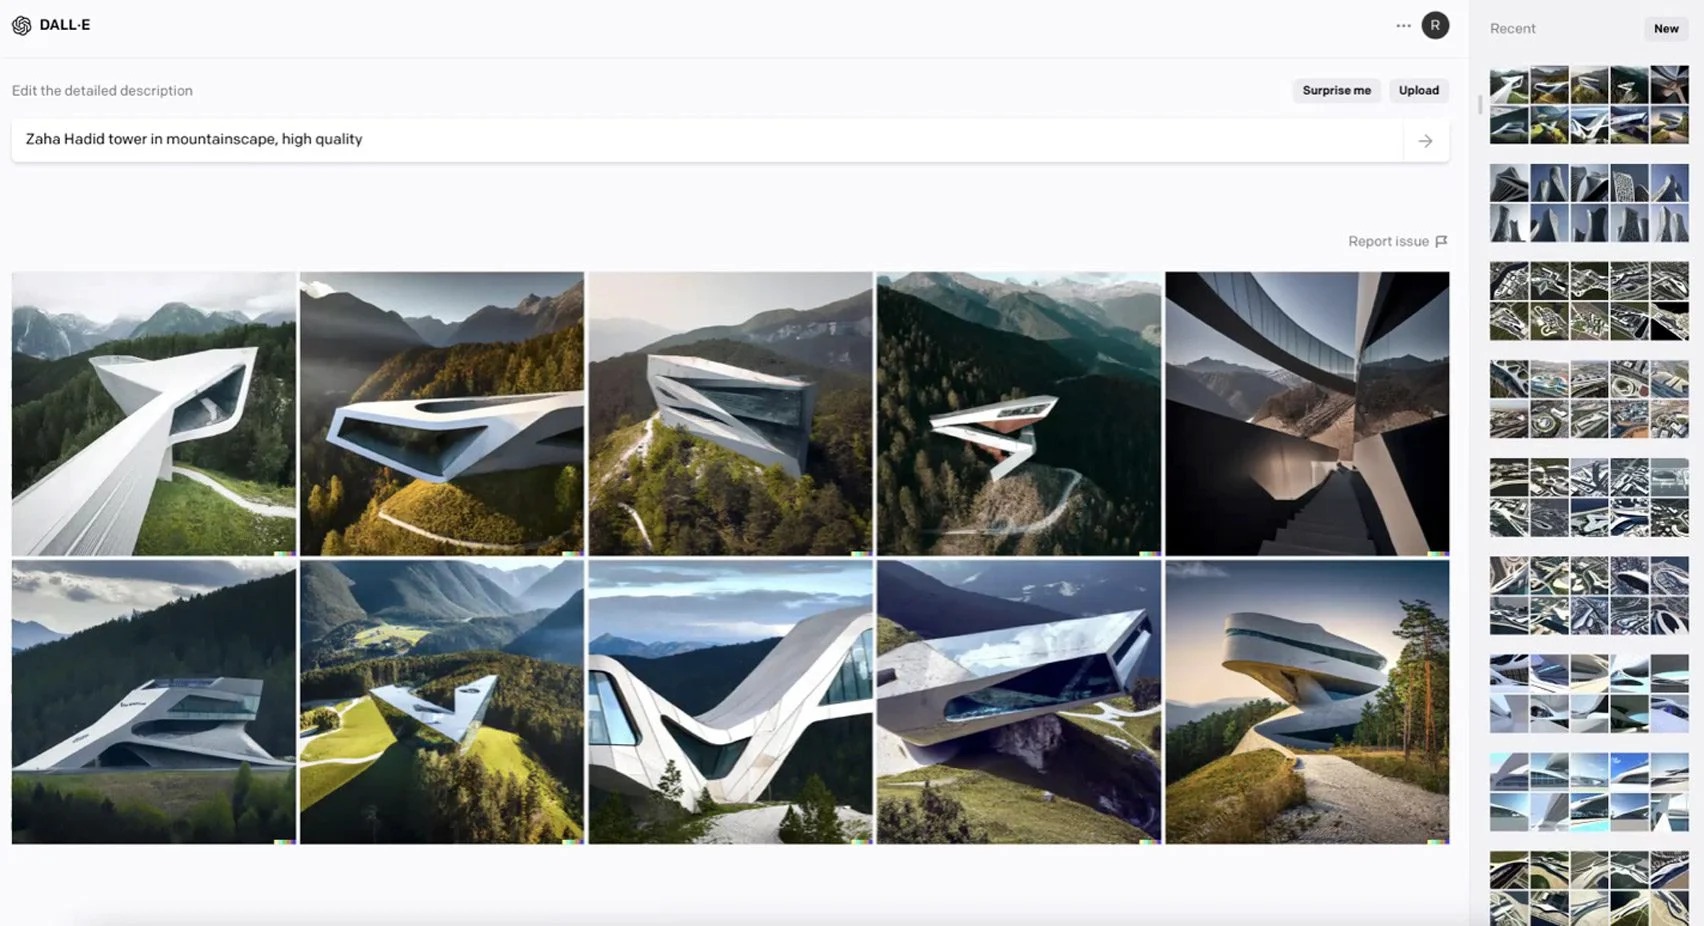 Zaha Hadid Architects is using AI text-to-image generators like DALL-E 2 and Midjourney to come up with design ideas for projects